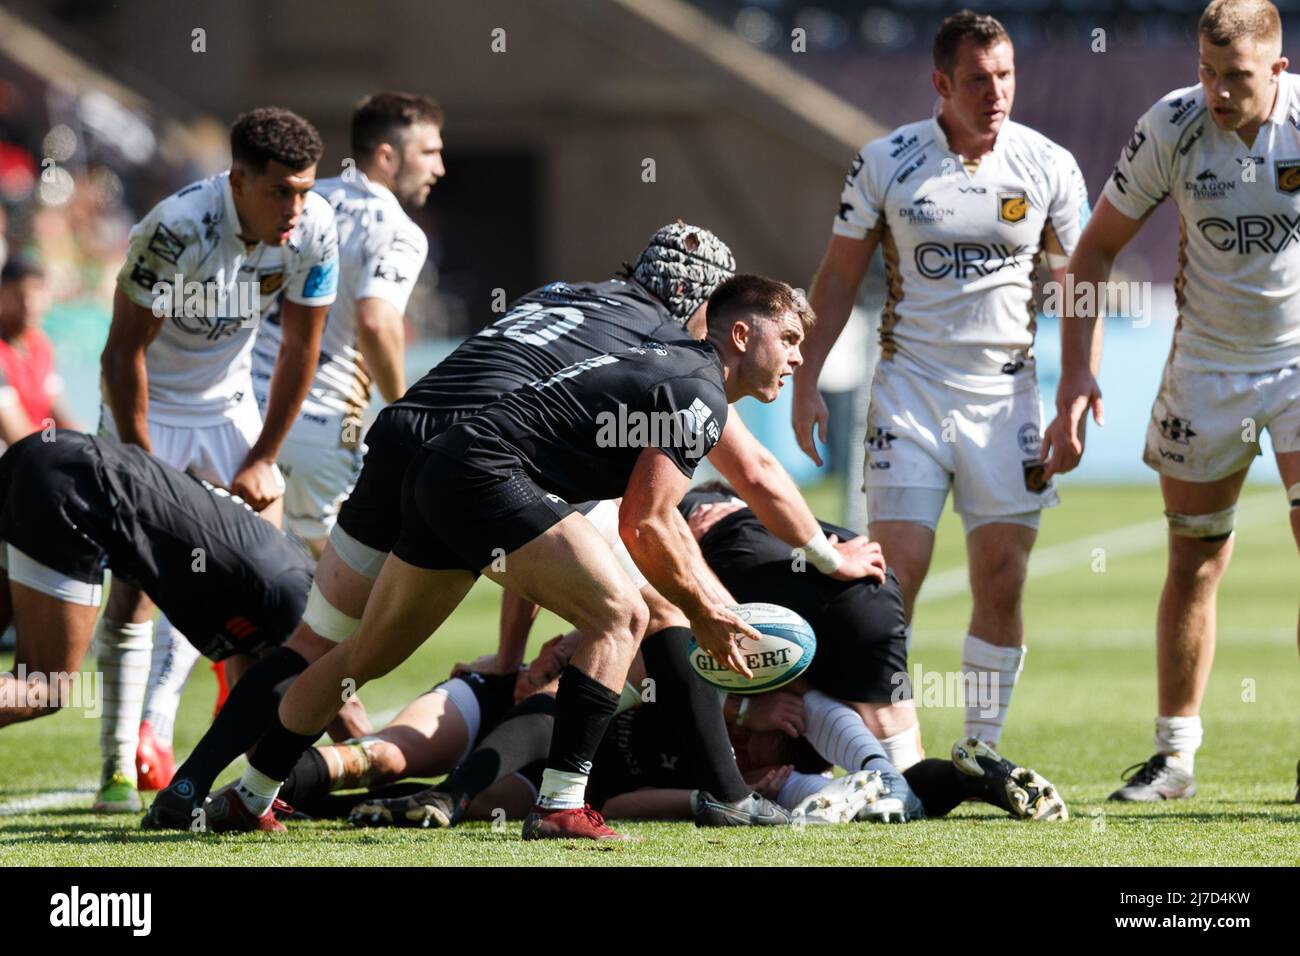 Swansea, UK. 8 May, 2022. Reuben Morgan-Williams of Ospreys passes the ball during the Ospreys v Dragons United Rugby Championship Match. Credit: Gruffydd ThomasAlamy Stock Photo